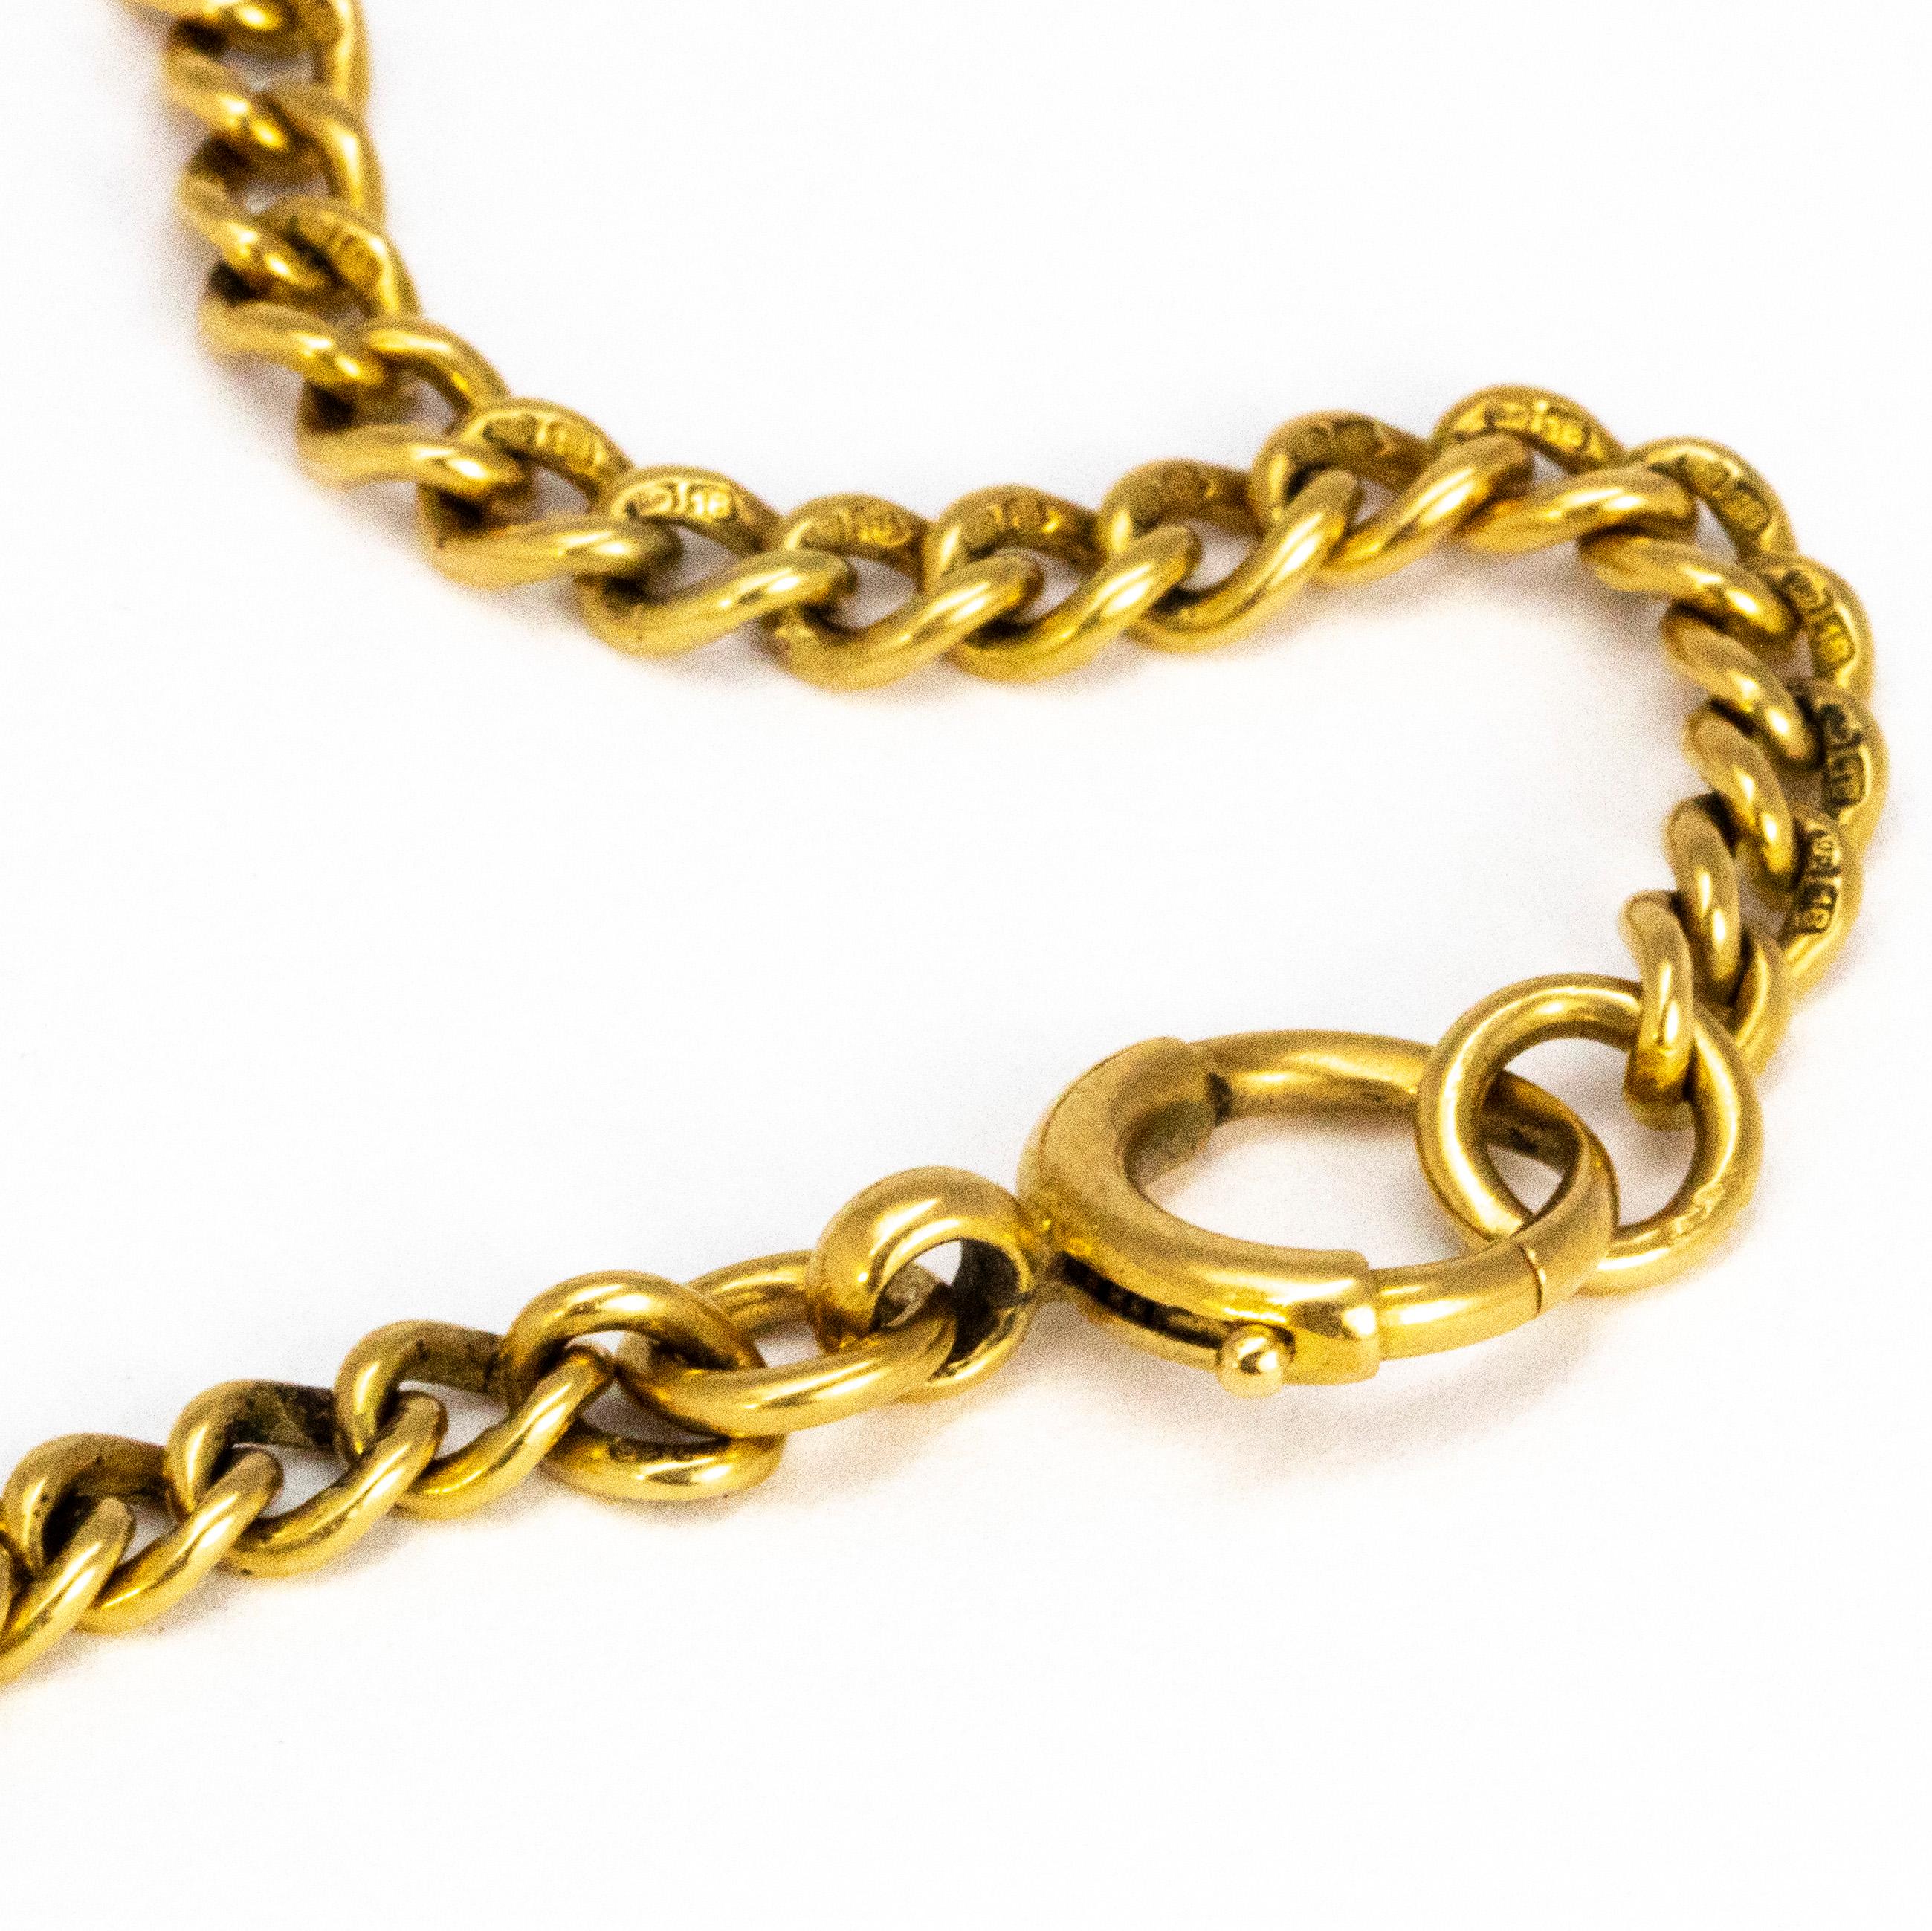 This delicate curb chain bracelet is slim and modelled in glossy 18ct gold. The bracelet is fastened by simple clasp and loop. Each link is hallmarked. 

Length: 18.5cm
Width: 4mm